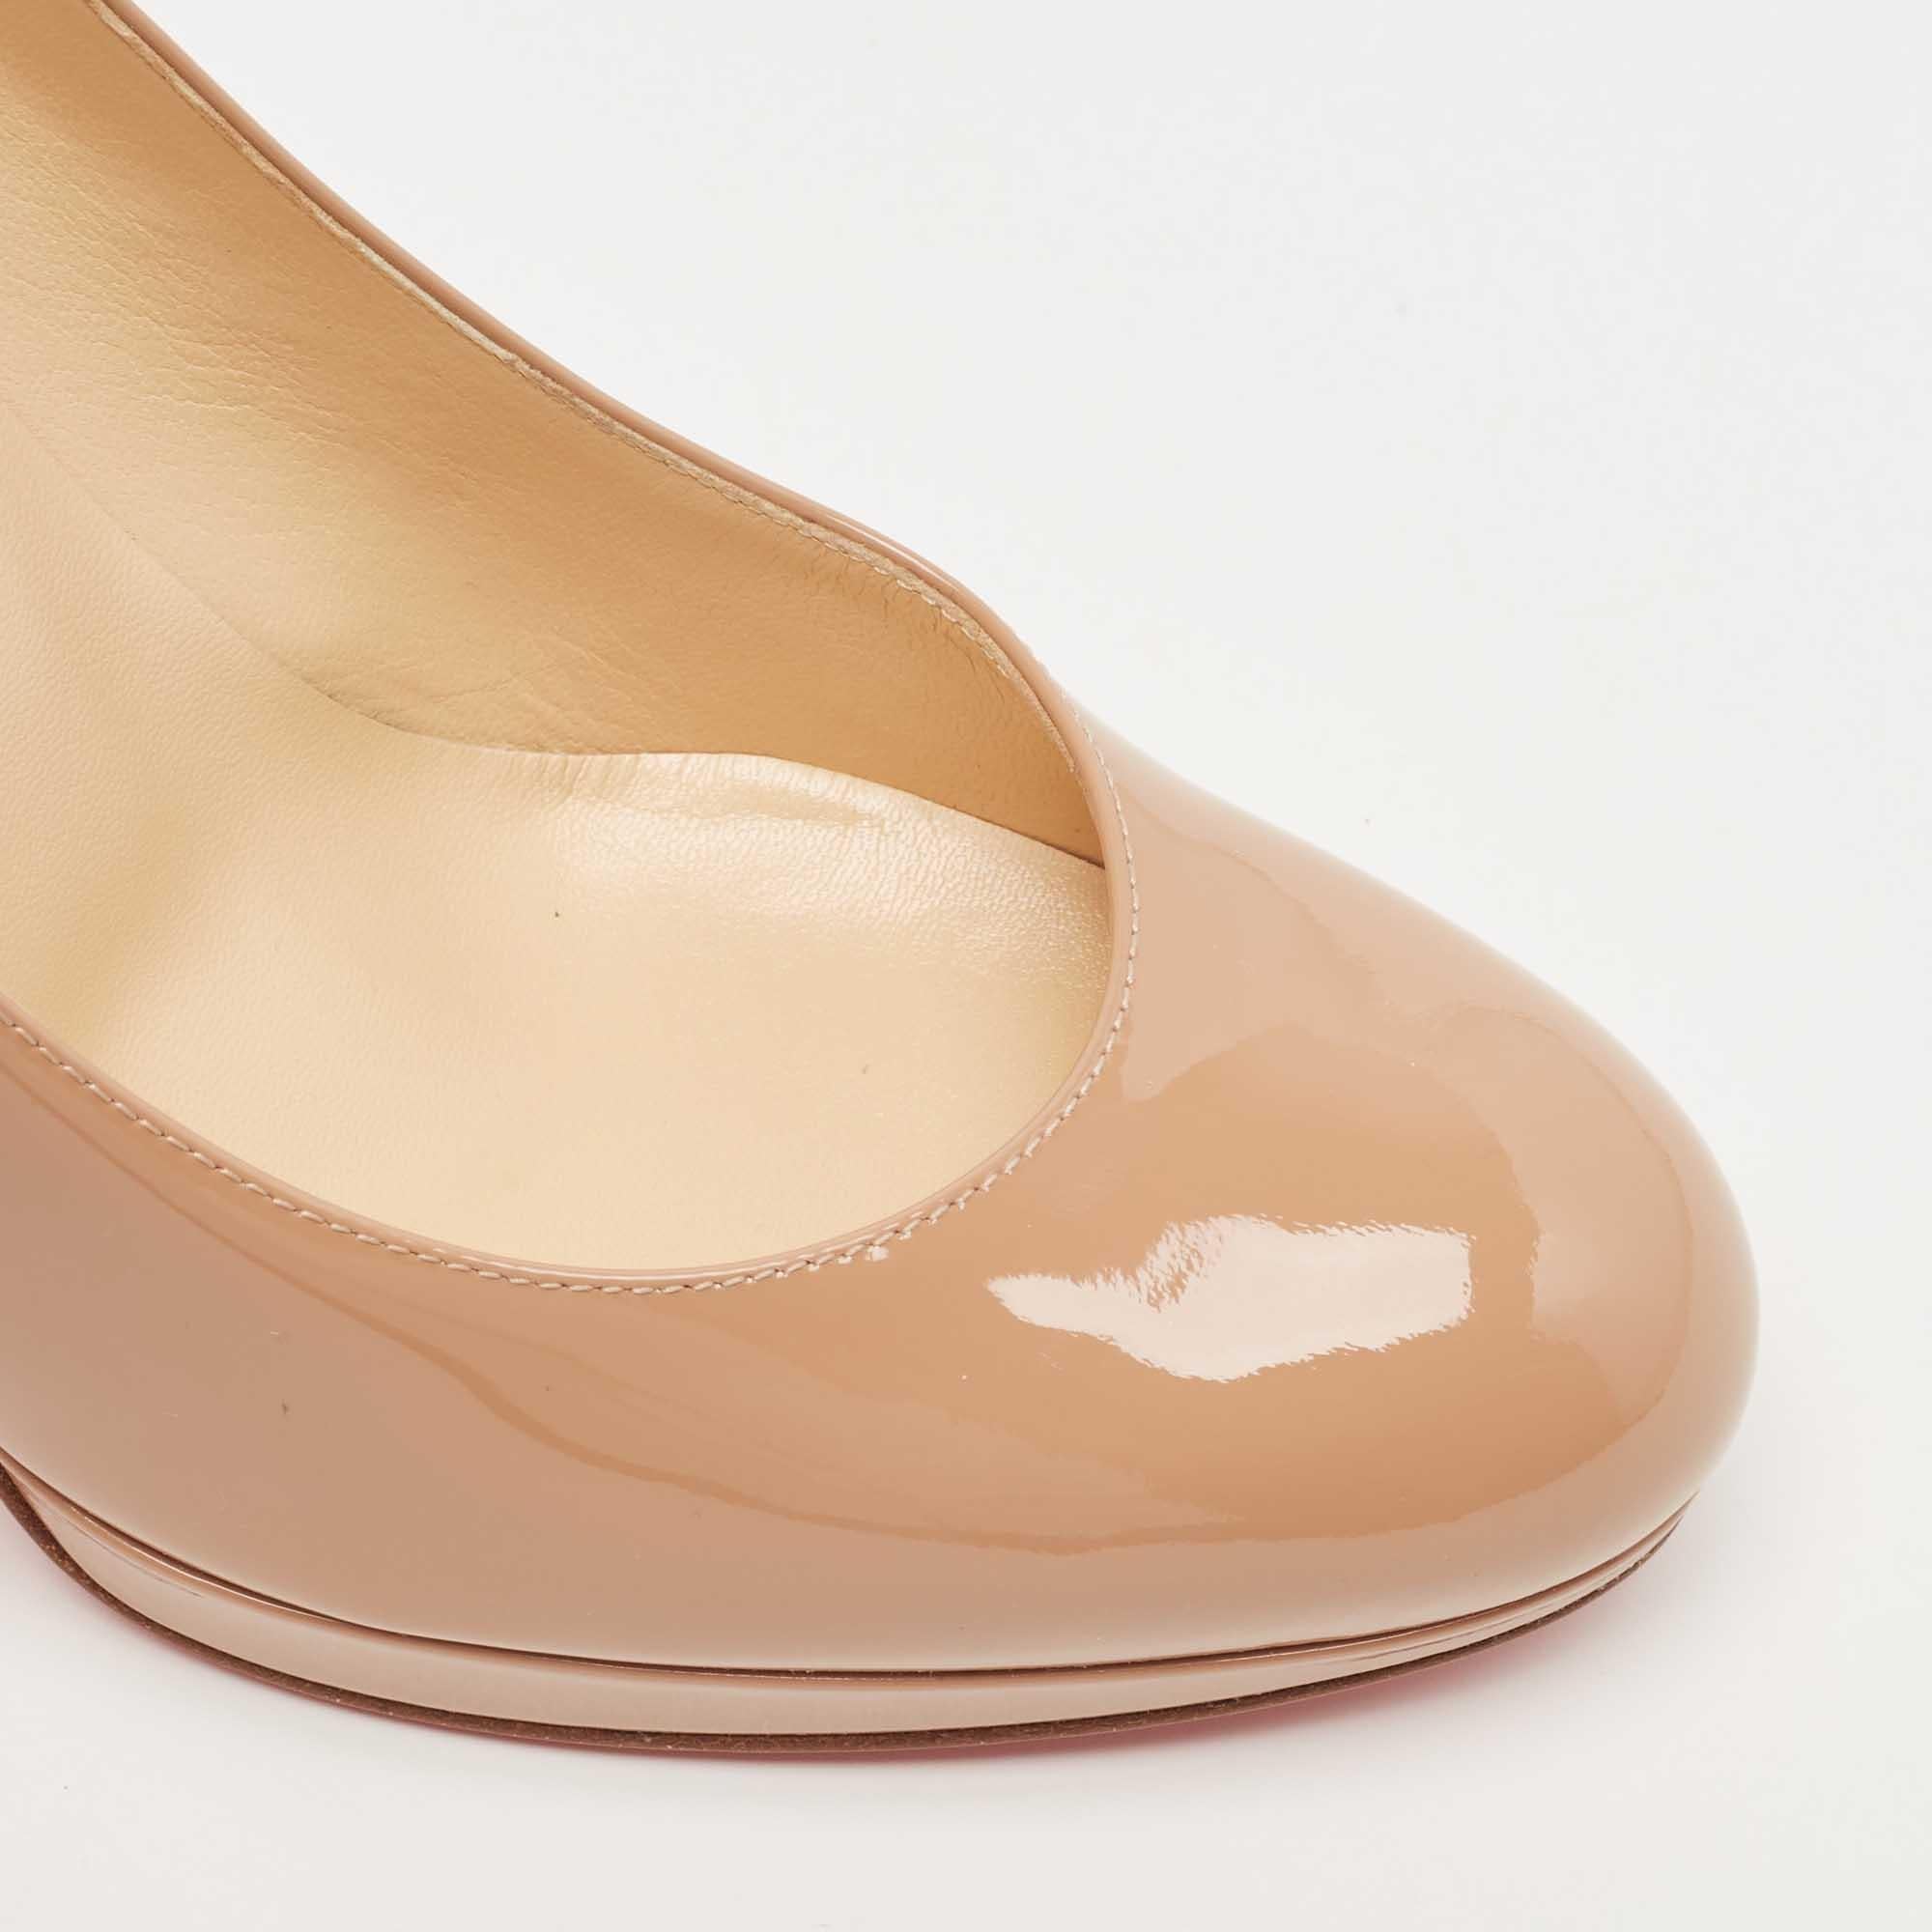 Christian Louboutin Beige Patent Leather New Simple Round Toe Pumps 1